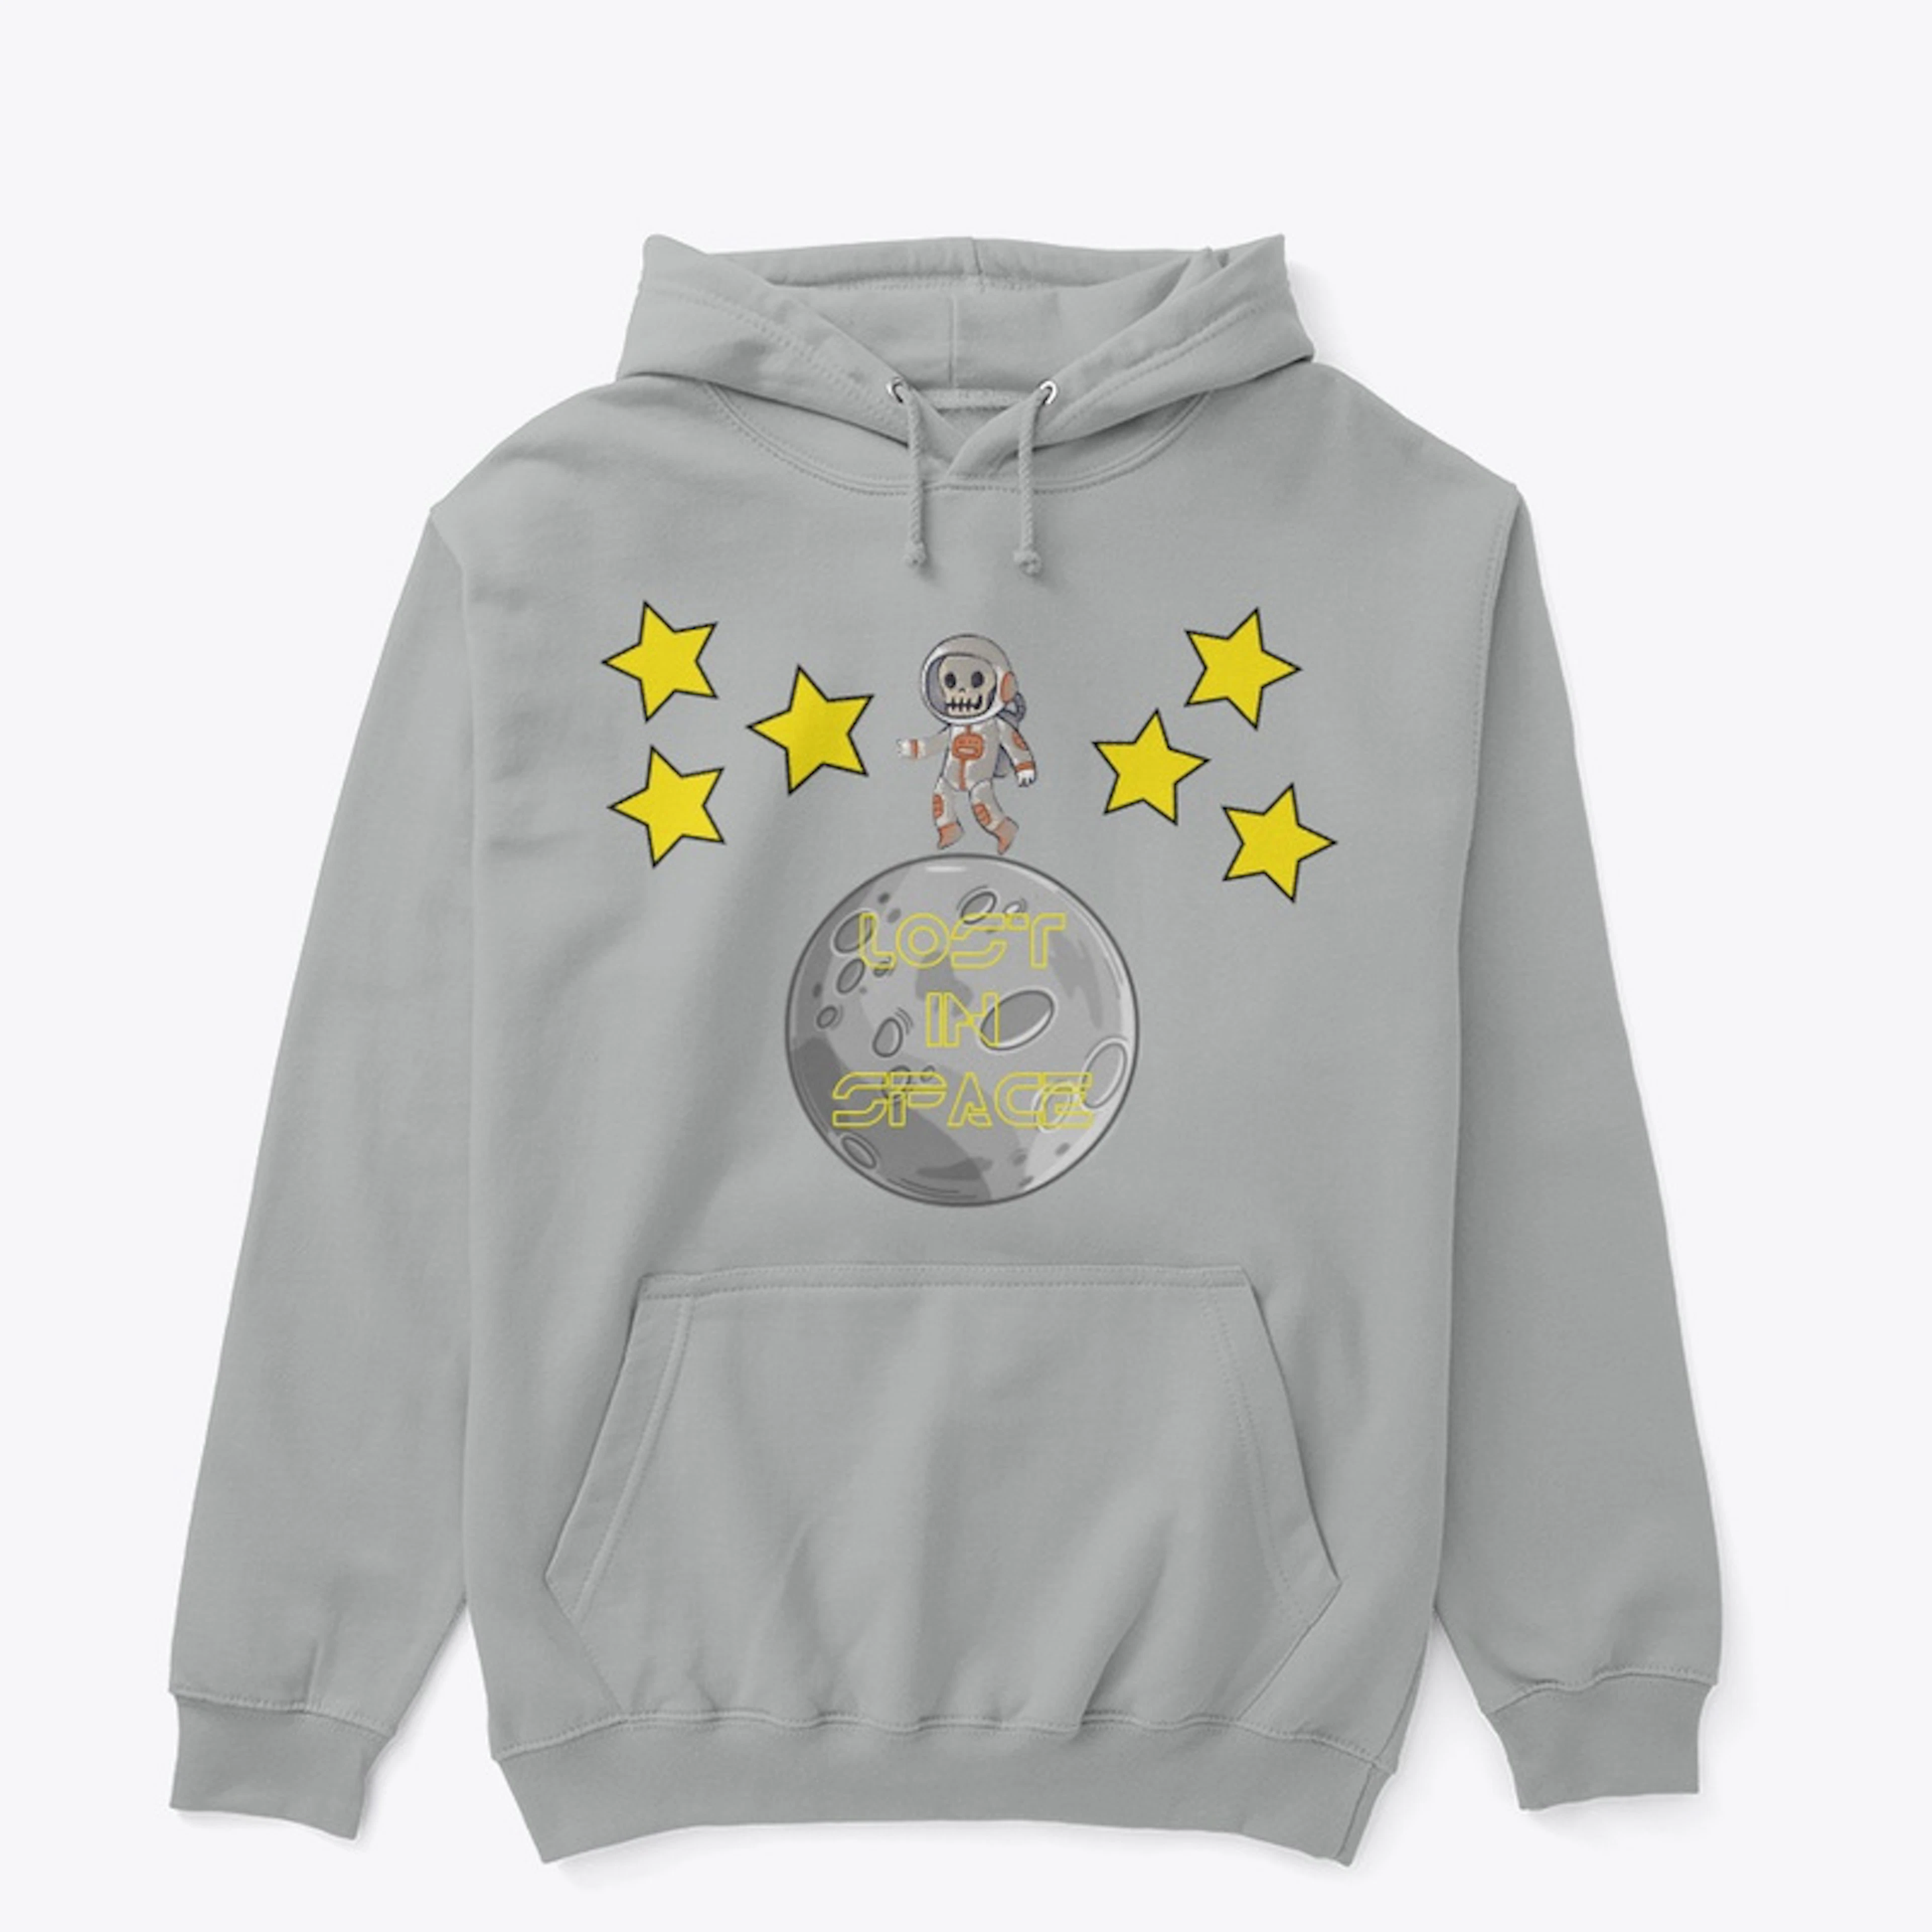 "LOST IN SPACE" Design.